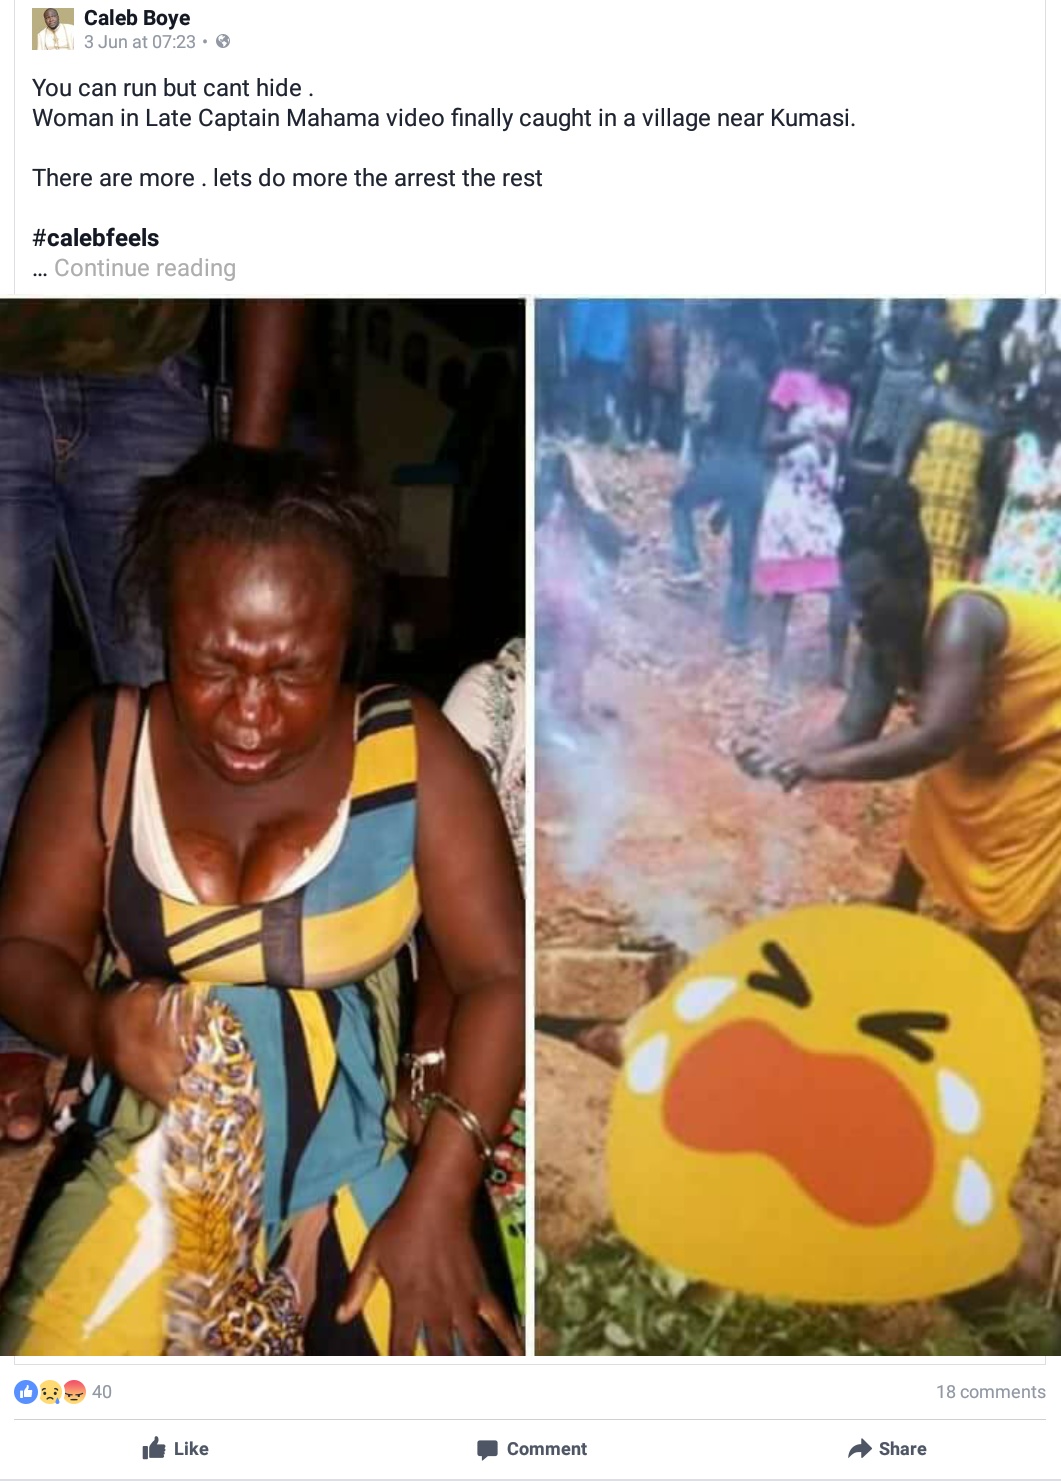 Photo Of The Lady Who Raised Alarm That Made Residents Lynch Captain Maxwell Mahama (1)